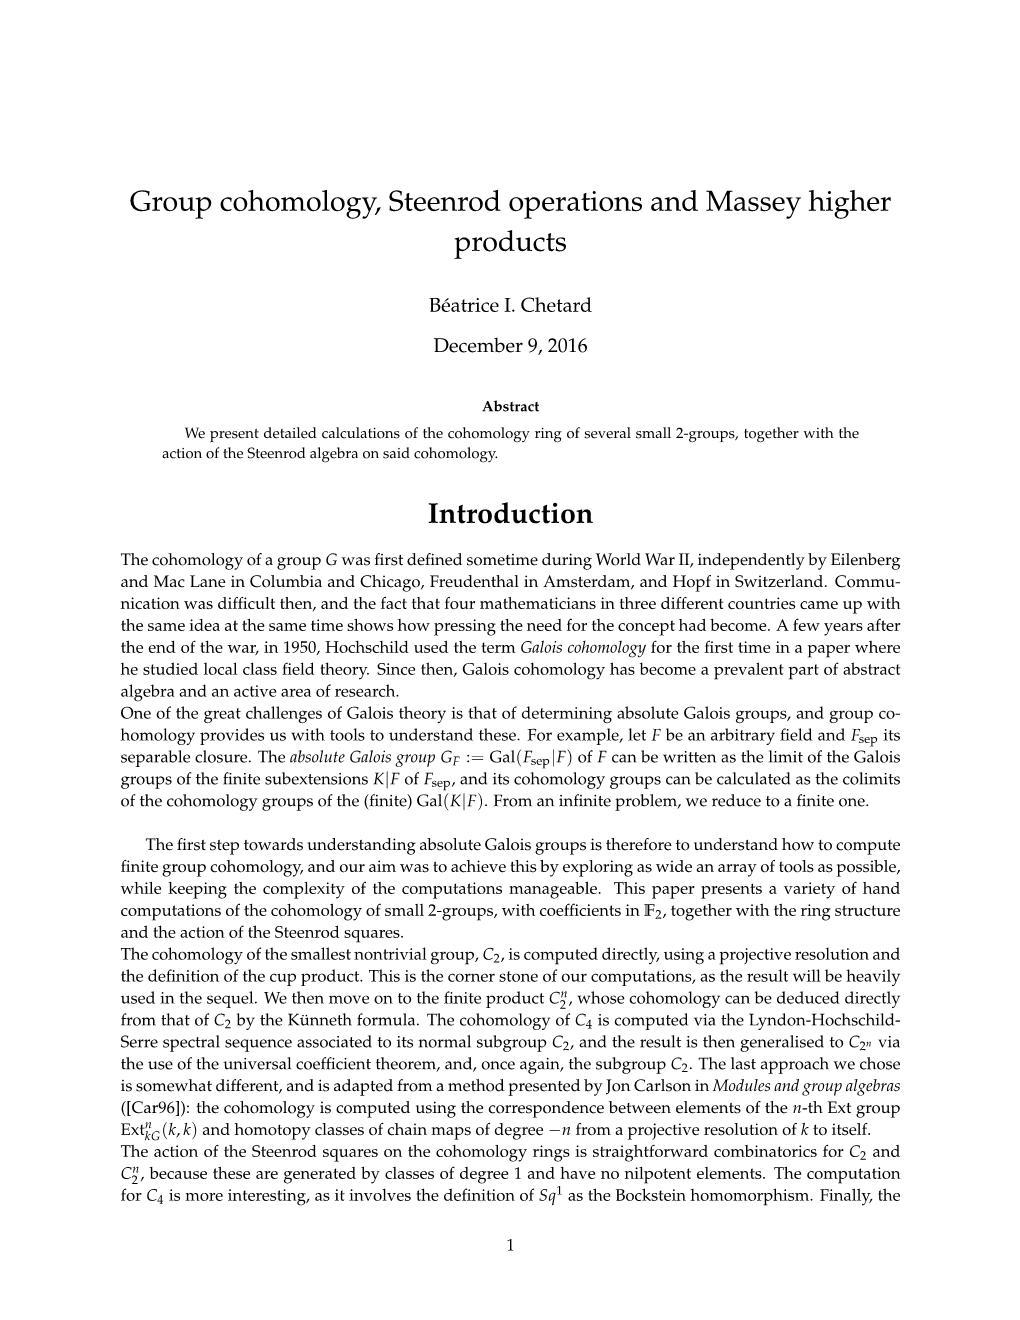 Group Cohomology, Steenrod Operations and Massey Higher Products